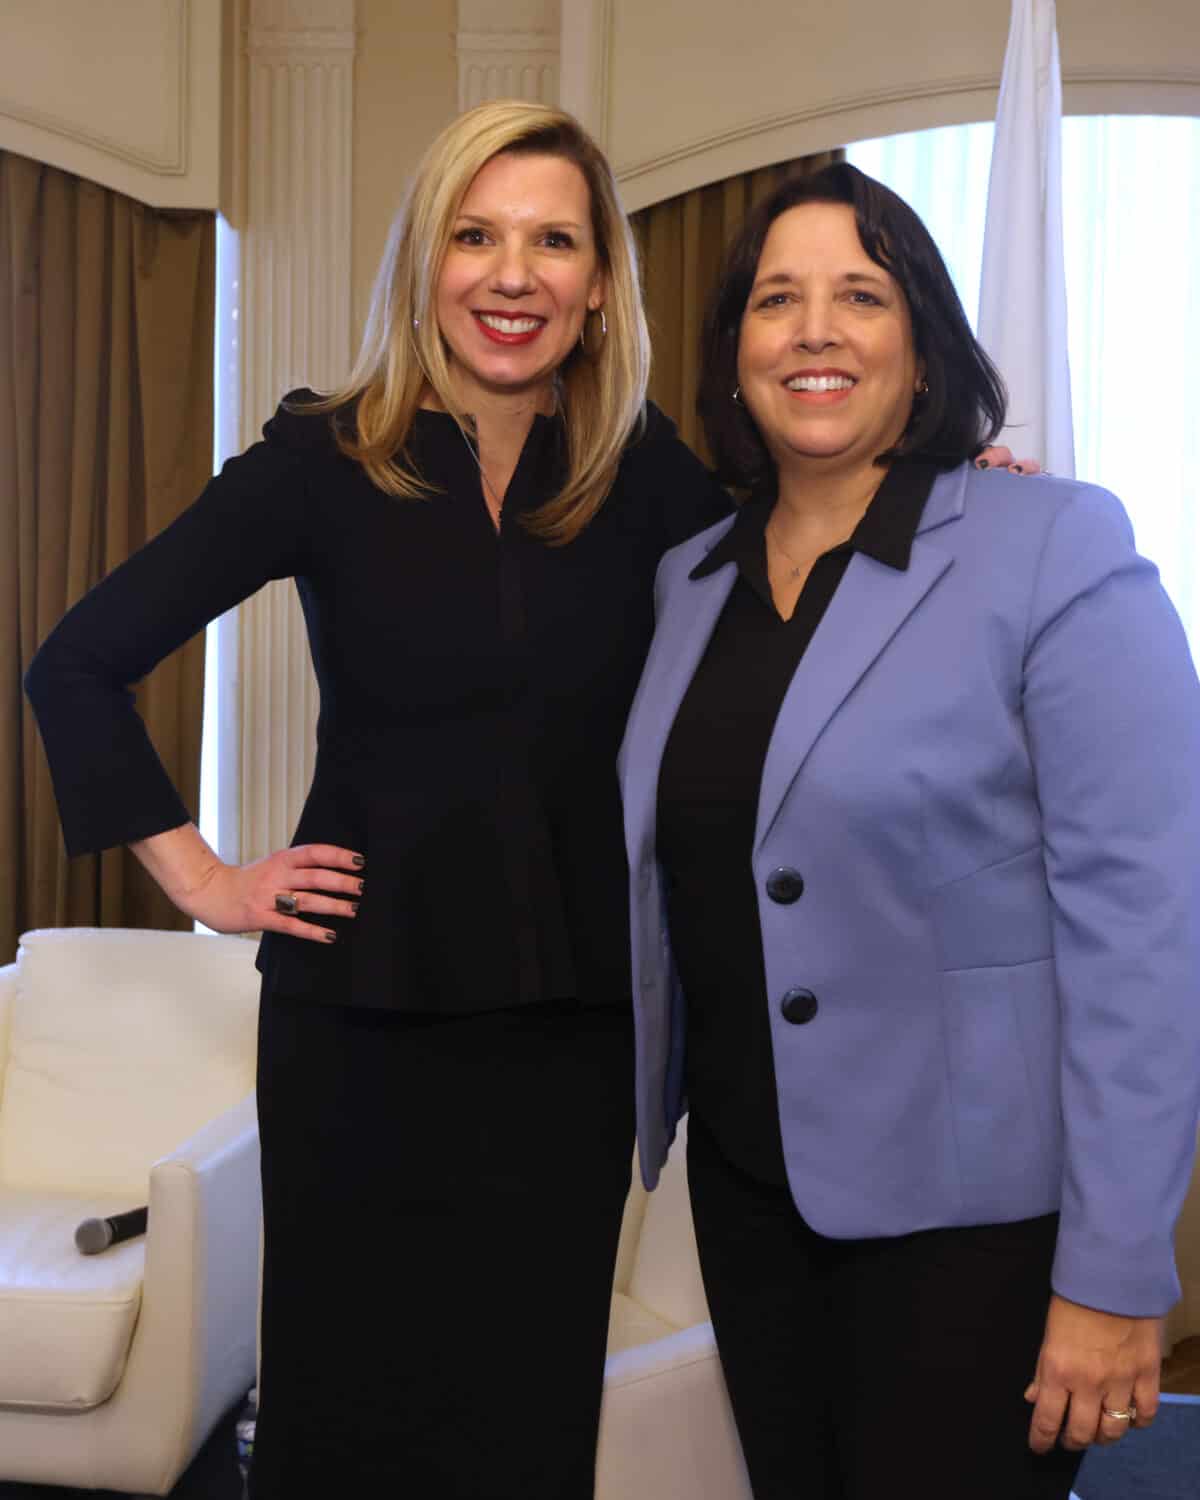 MassBio CEO and President Kendalle Burlin O'Connell in a black dress posting for a photo with Massachusetts Lt. Governor Kim Driscoll who is wearing a lavender jacket.